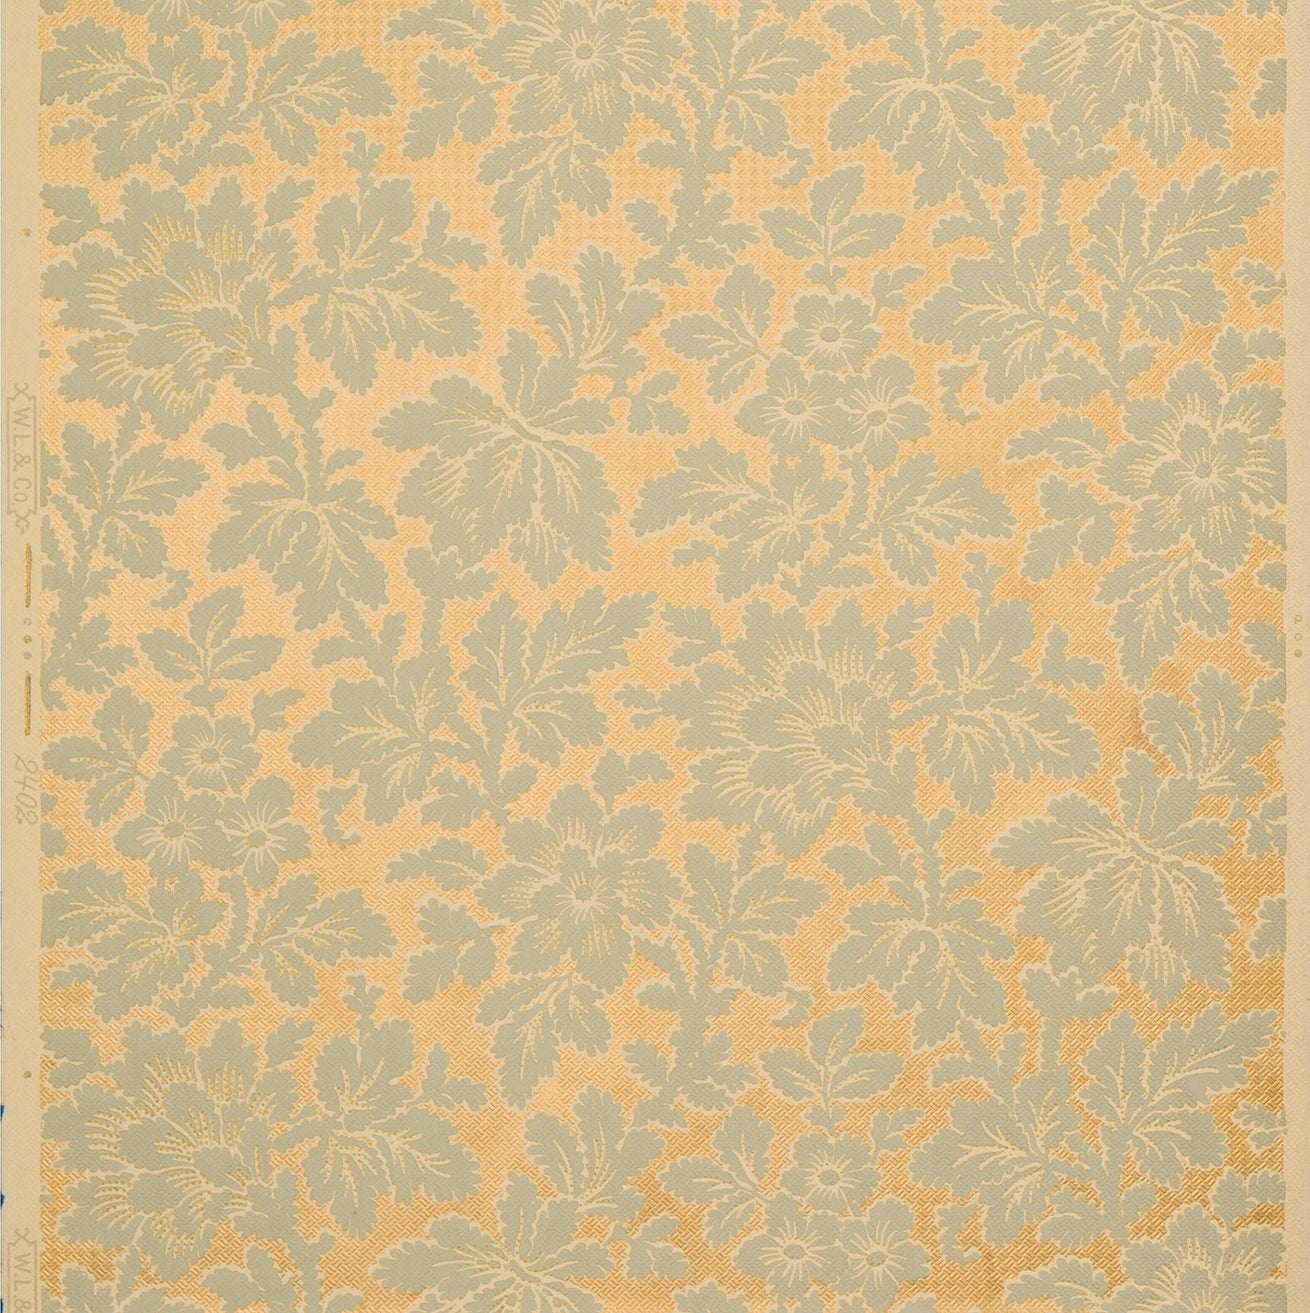 All-Over Floral/Foliate with Gilt Background - Antique Wallpaper Remnant